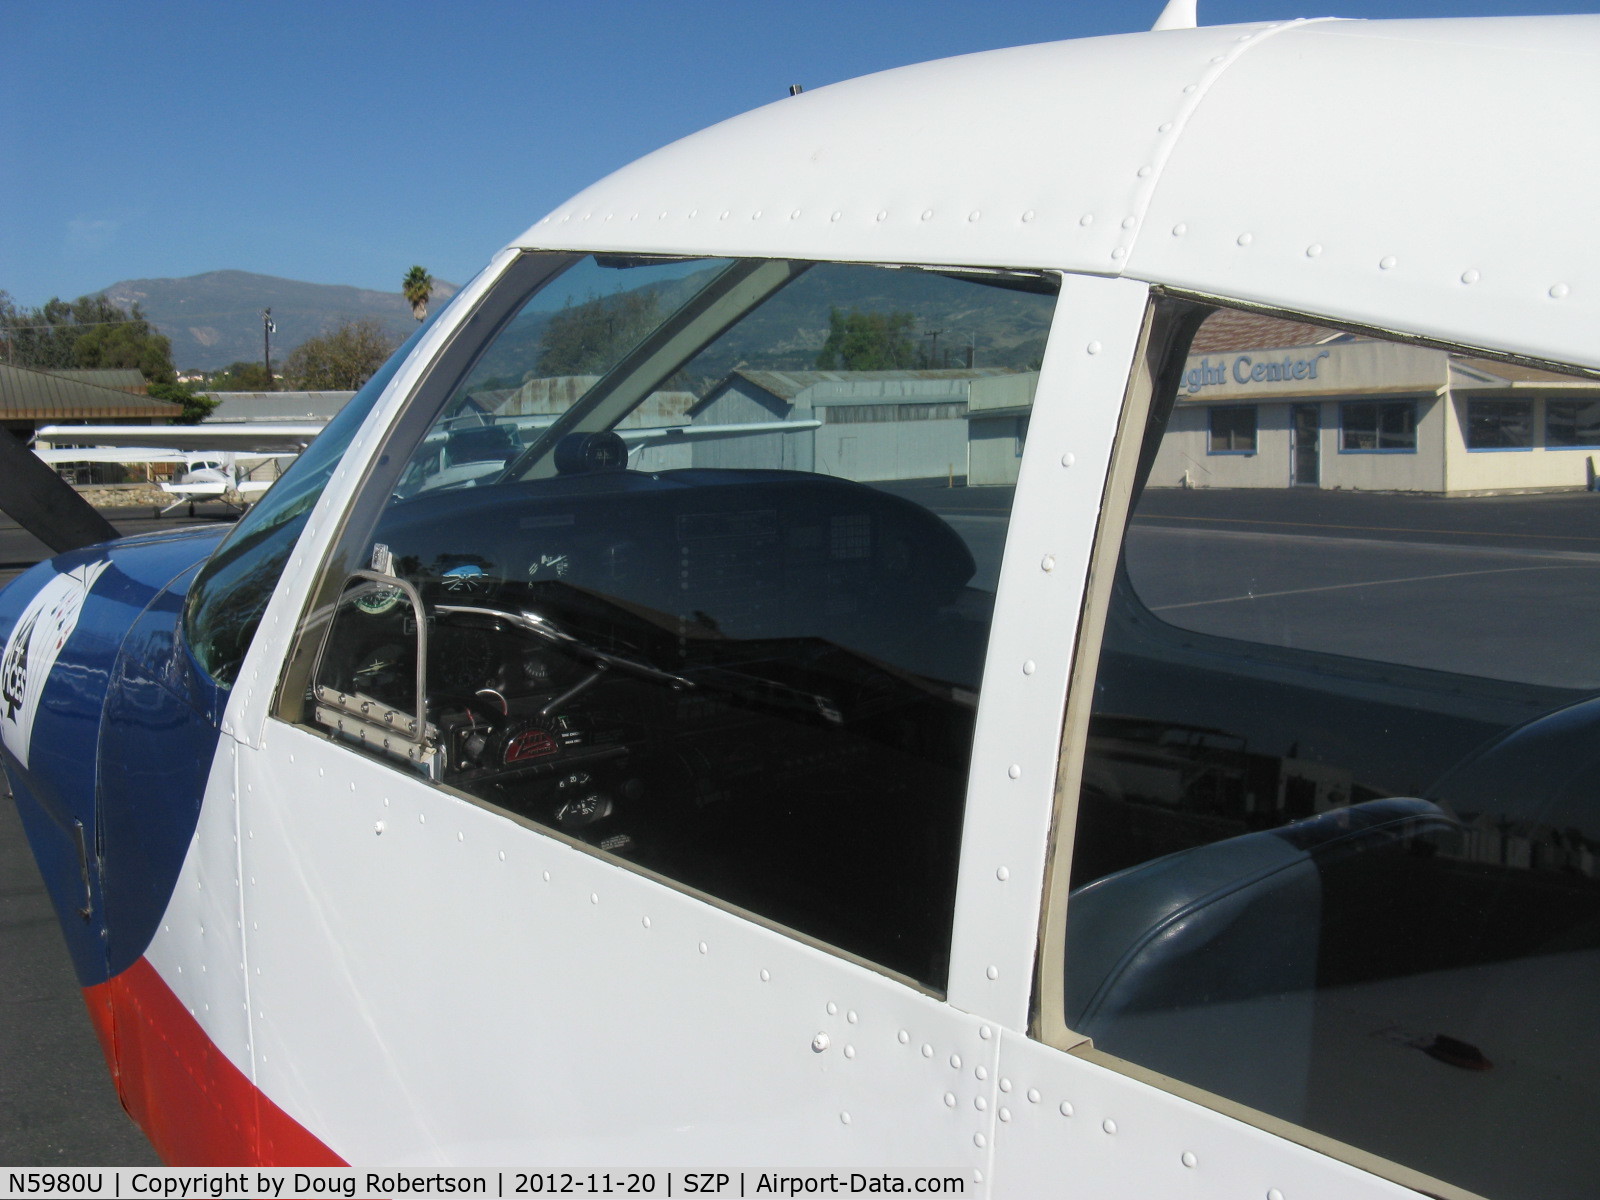 N5980U, 1970 Piper PA-28-140 C/N 28-26870, 1970 Piper PA-28-140 CRUISER, Lycoming O-320-E2A 150 Hp, 1970 introduced Dynafocal engine mount for reduced vibration/noise, overhead air vents, 6 way adjustable front seats.